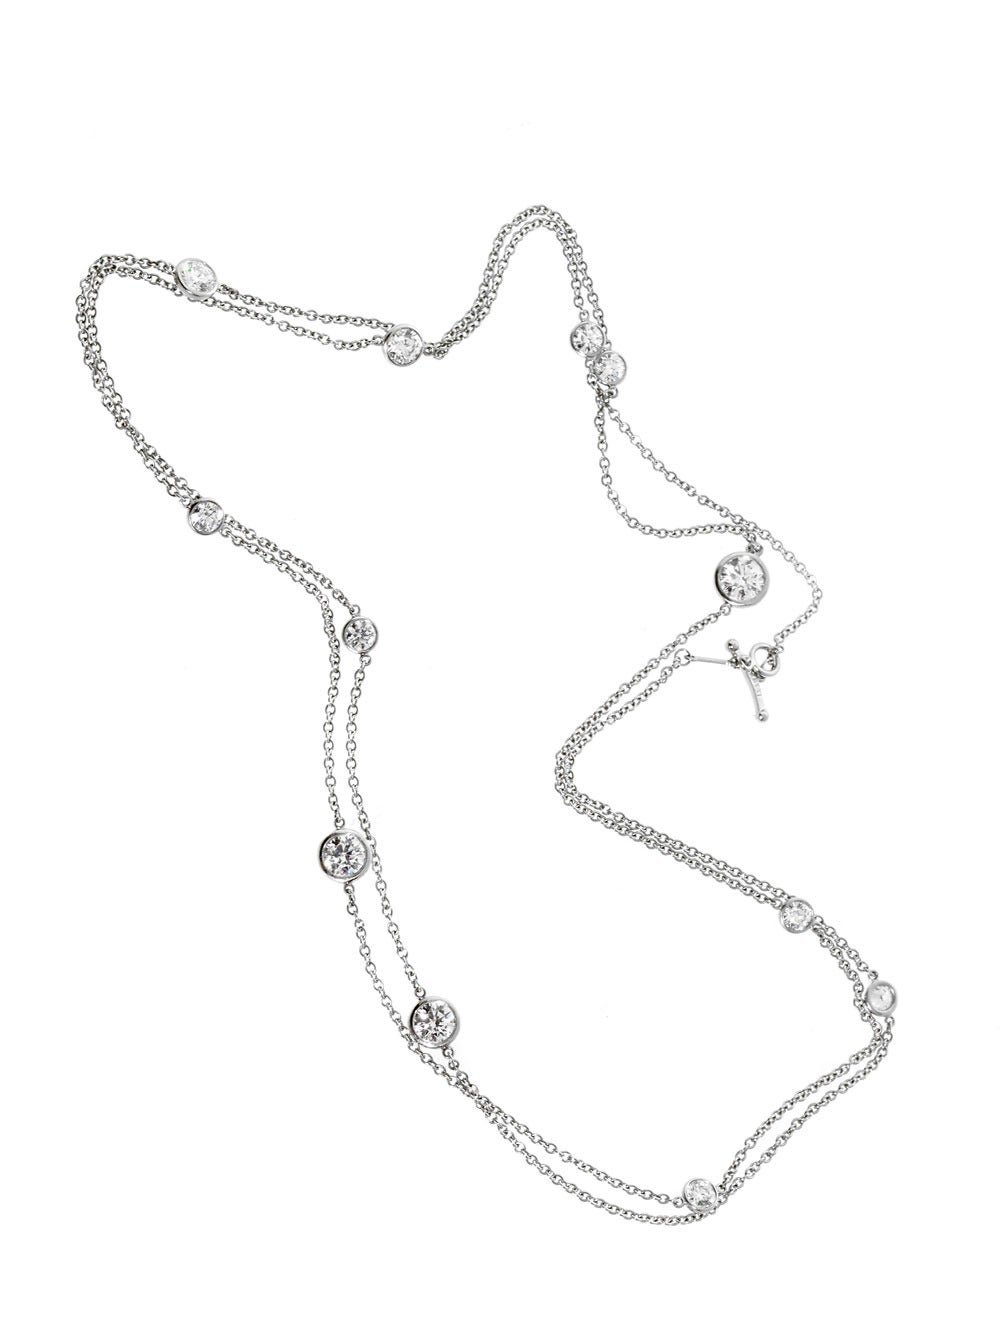 Breathtaking beauty and lavish luxury are just the start of things on this phenomenal Yard Platinum Necklace from Tiffany & Co. An impressive 4.75ct of brilliant Vs1 E-F Color Diamonds are distributed throughout the immaculate Platinum links,